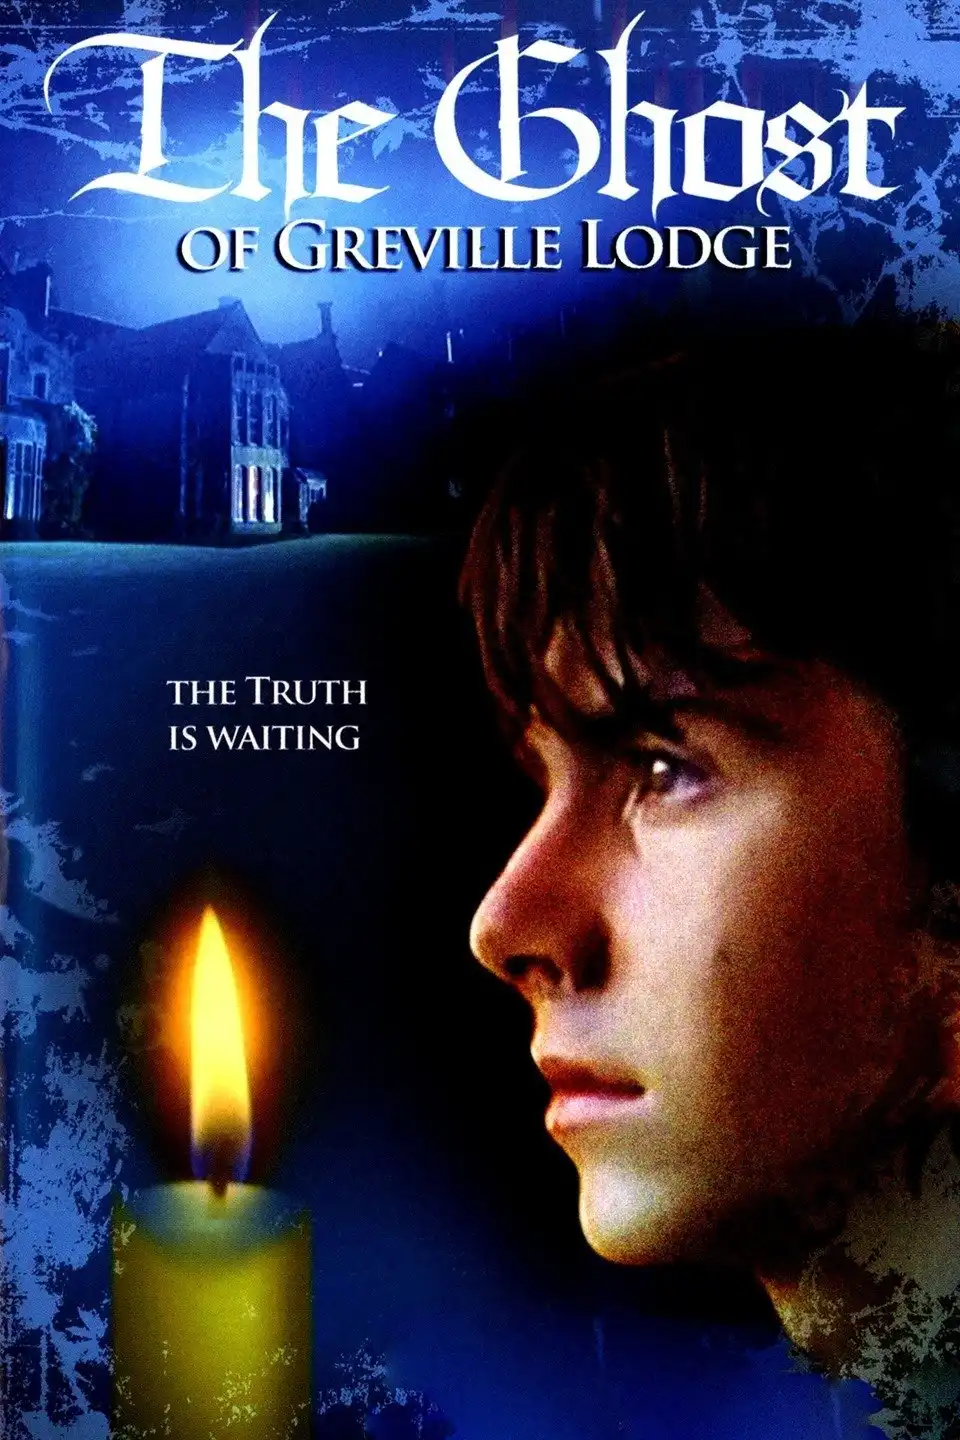 Watch and Download The Ghost of Greville Lodge 6